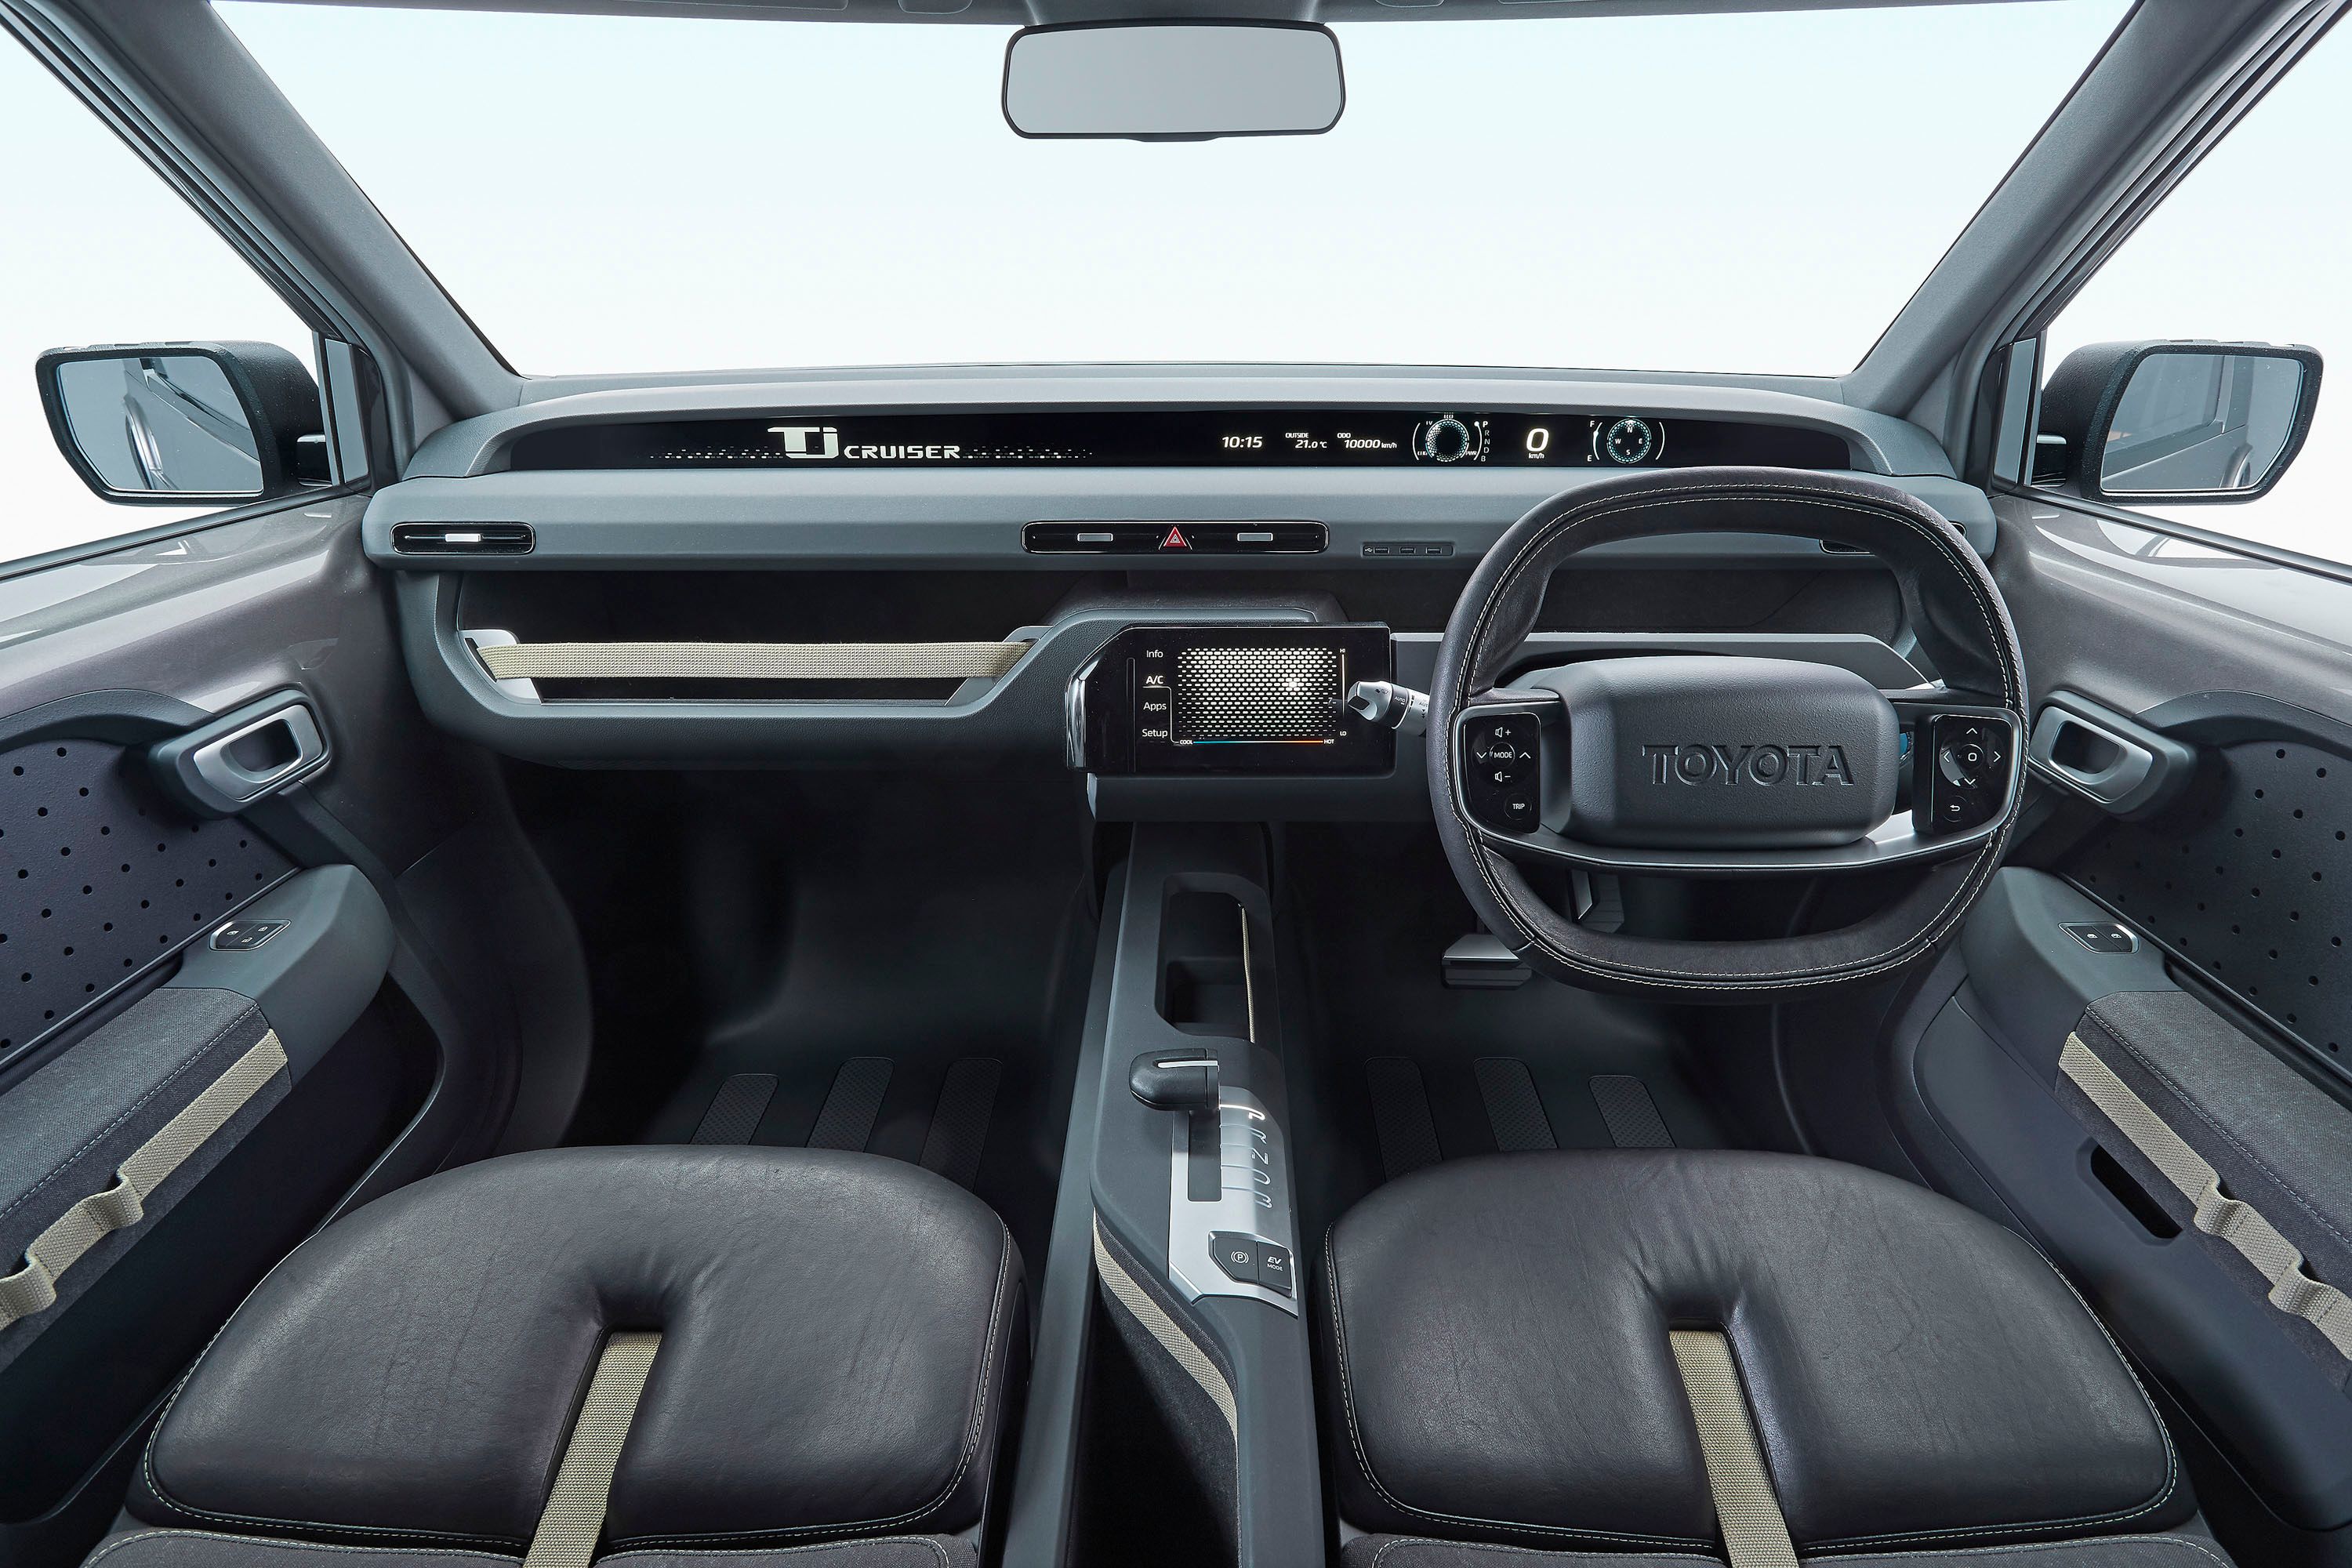  The interior is all about functionality and forward-thinking